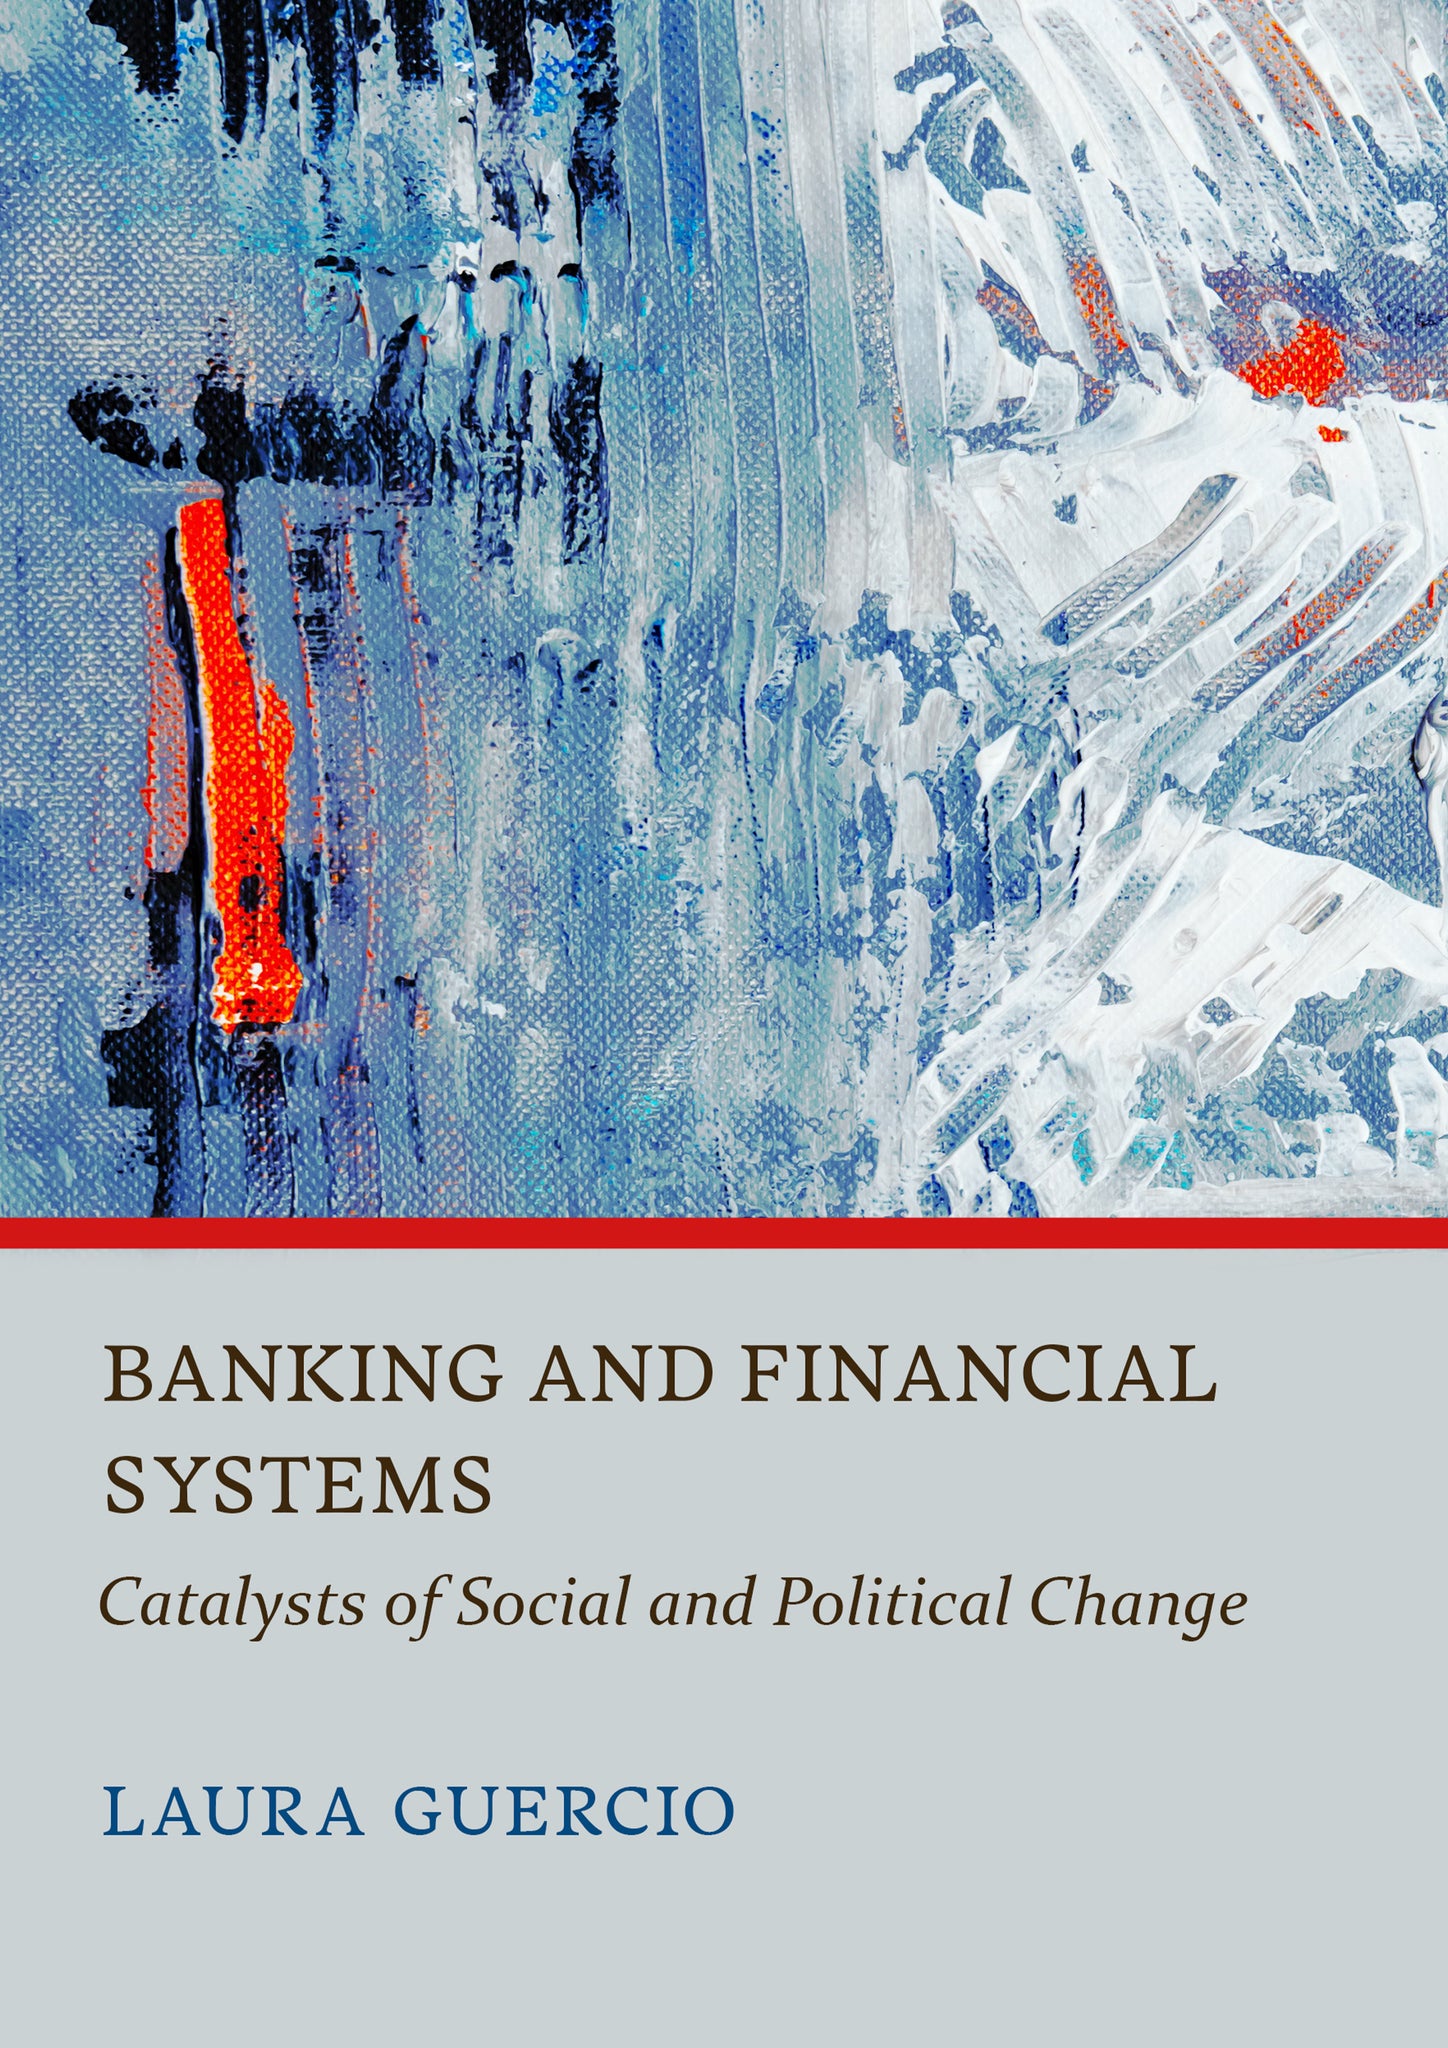 Banking and Financial Systems: Catalysts of Social and Political Change